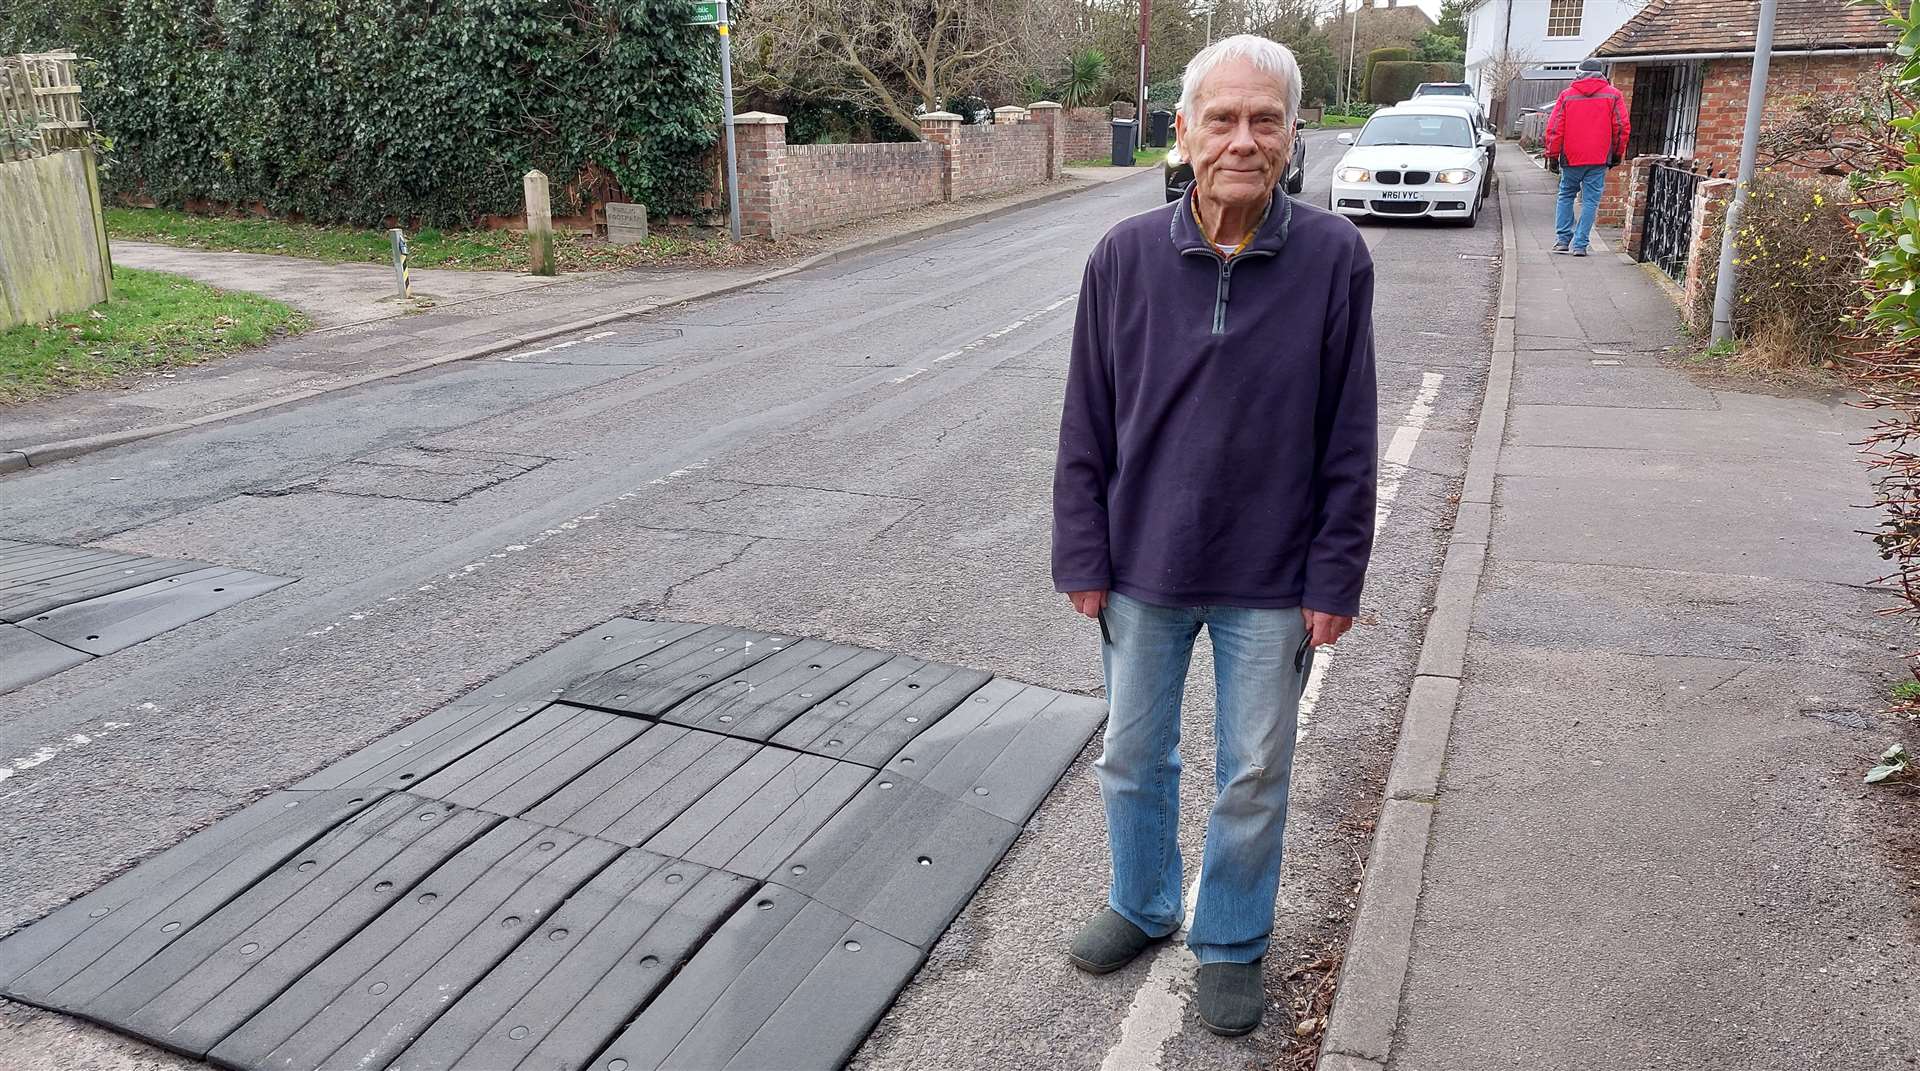 Robin Beresford, 83, wants the 30mph speed limit to be reduced